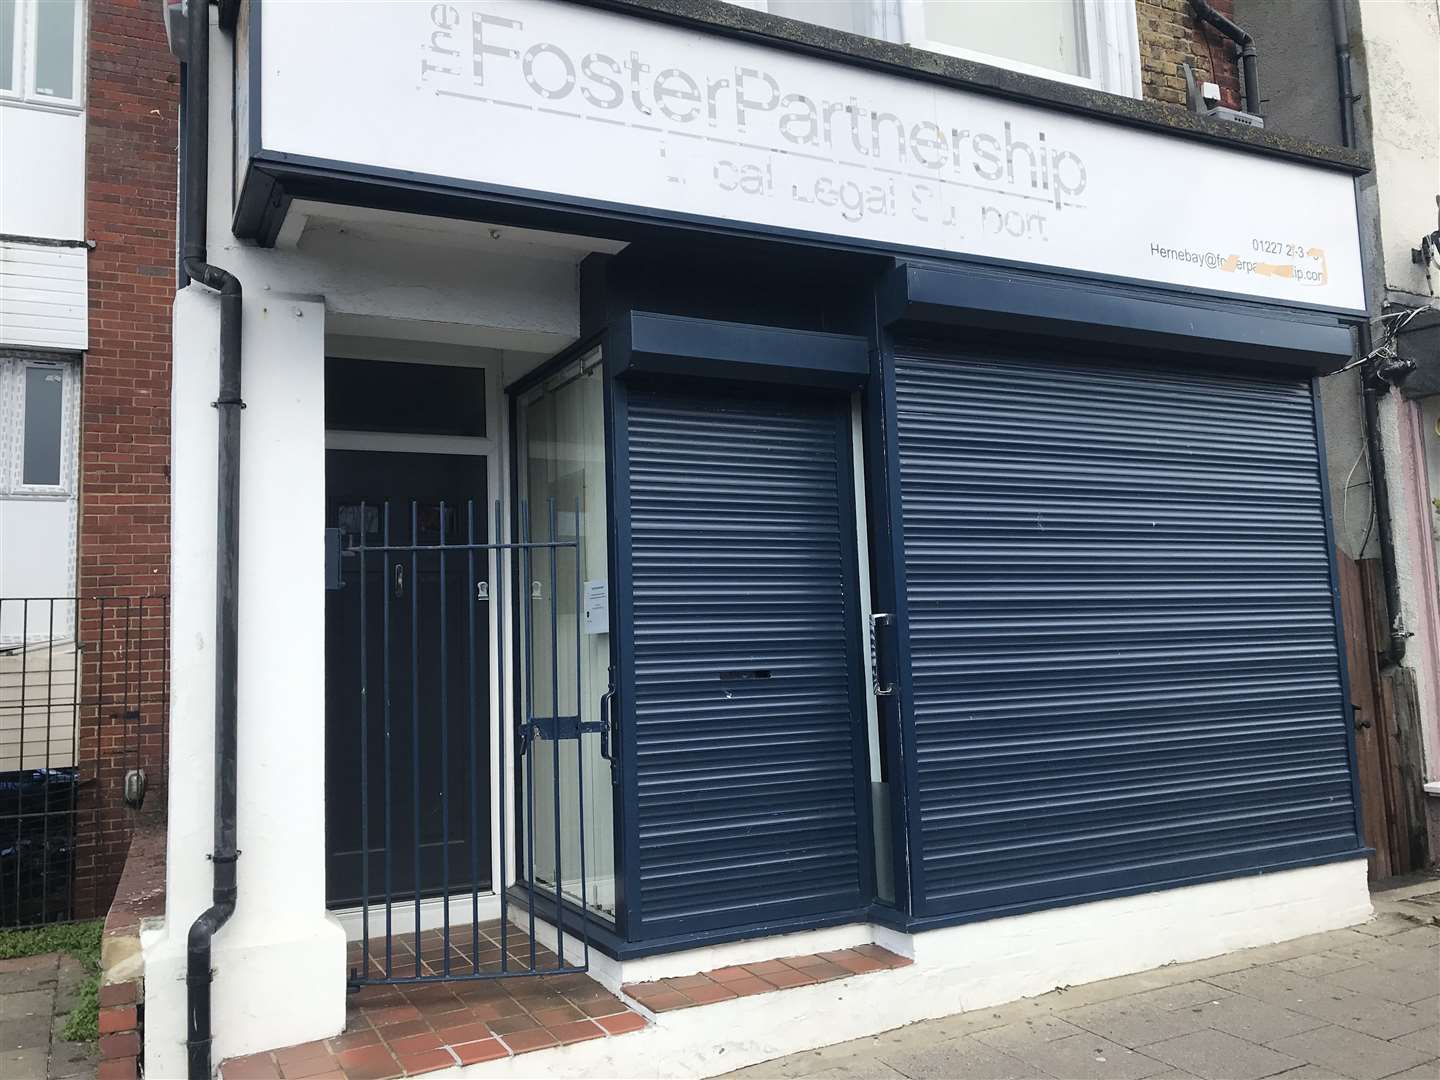 The Foster Partnership was shut down following an investigation by officers from law watchdog Council of Licenced Conveyancers. Pictured here is the firm's former office in Herne Bay High Street